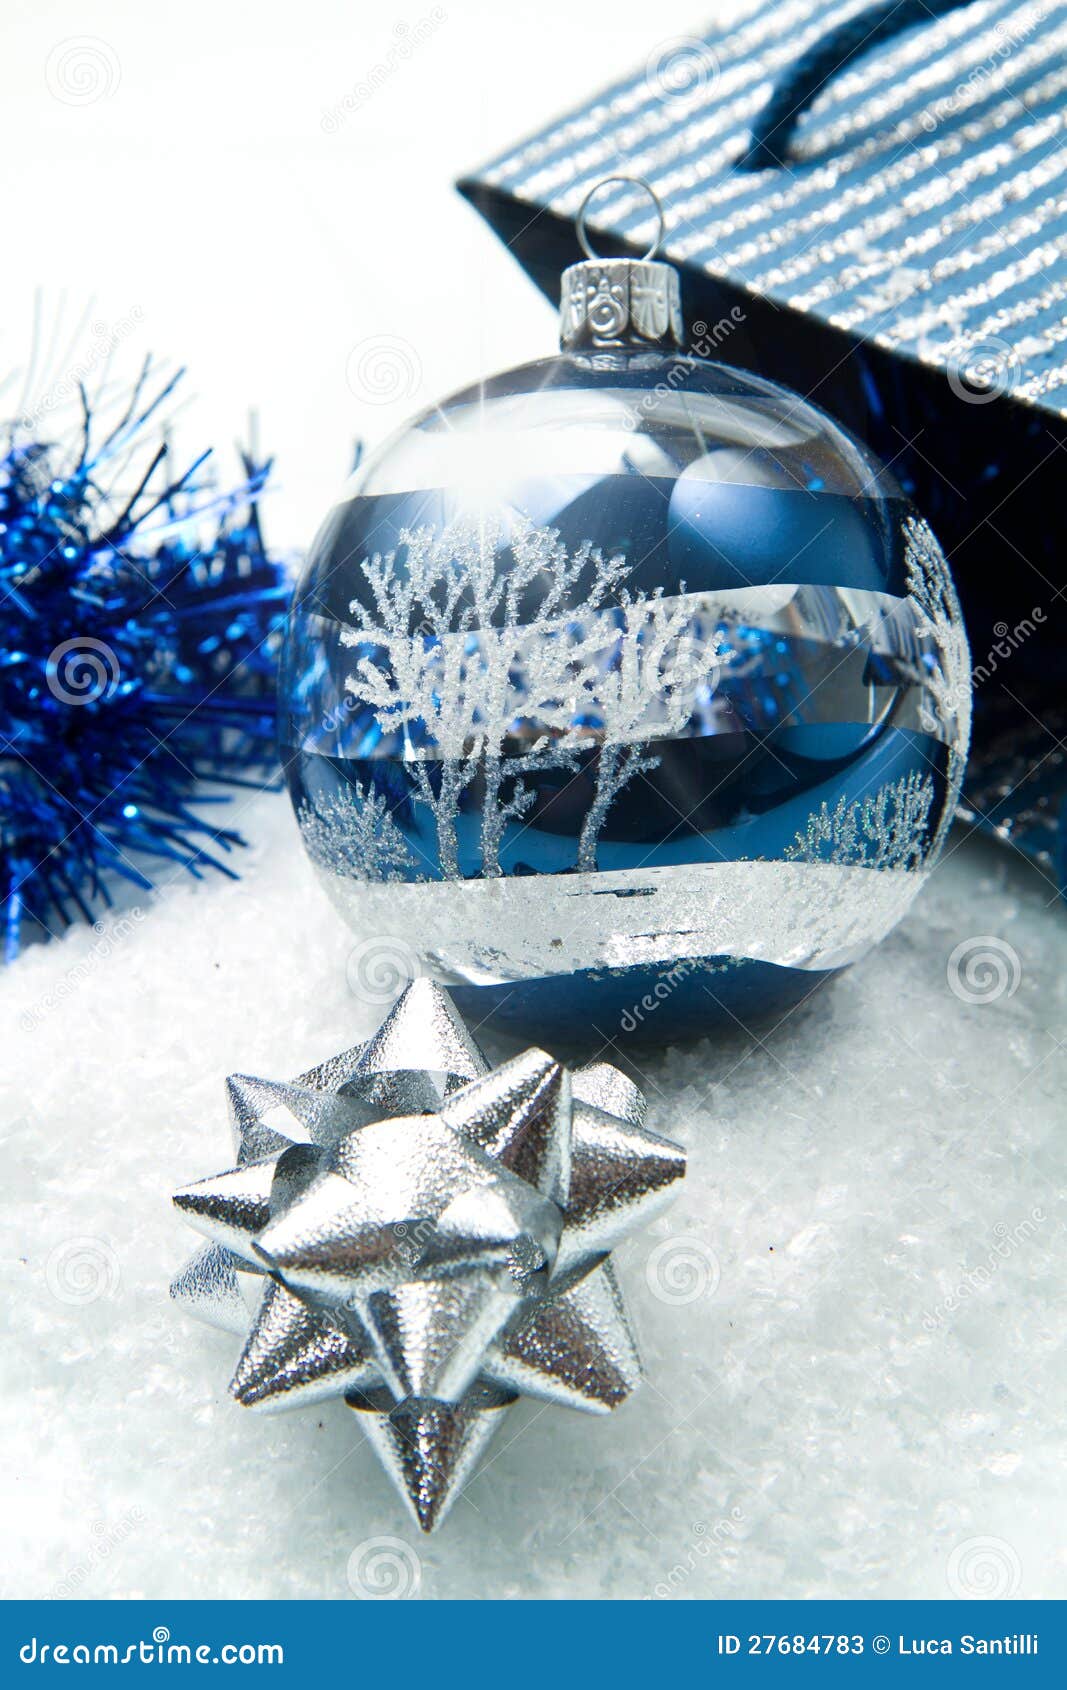 Blue And Silver Christmas Decorations Stock Photos - Image: 27684783